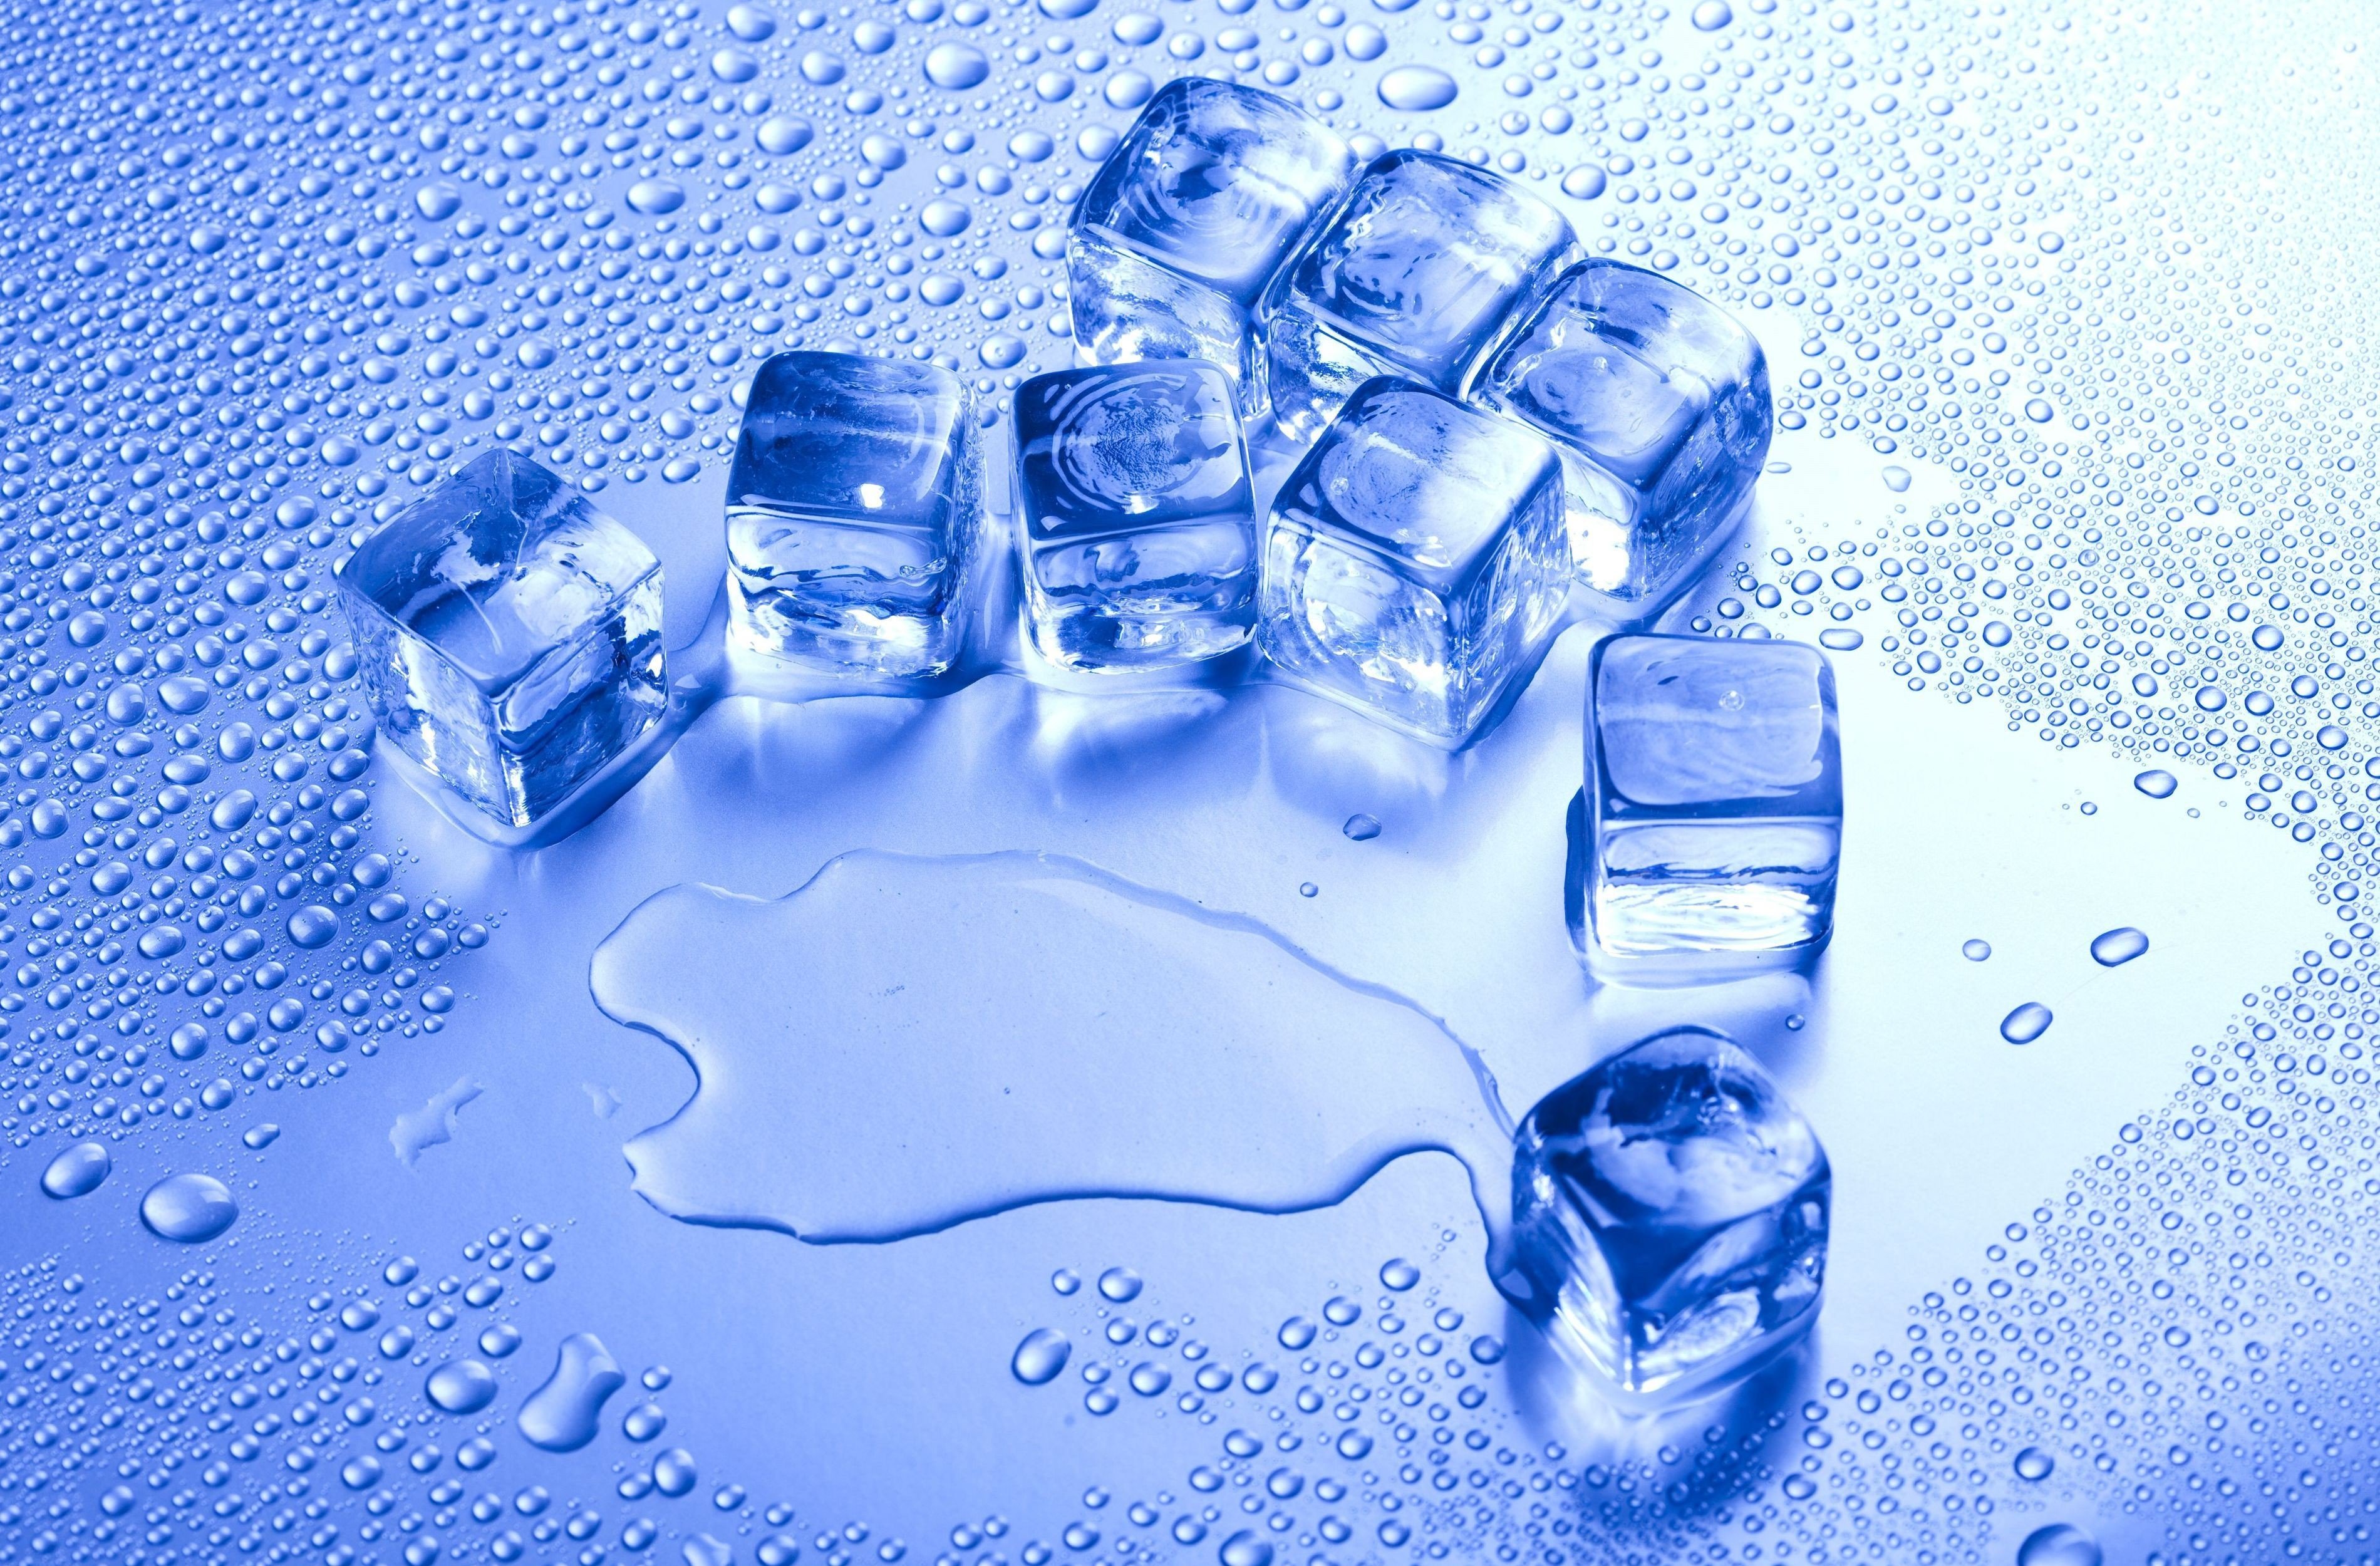 Wallpaper, water drops, blue, cube, simple, ice cubes, bottle, hand, mineral water, product, drinking water, bottled water 3800x2500